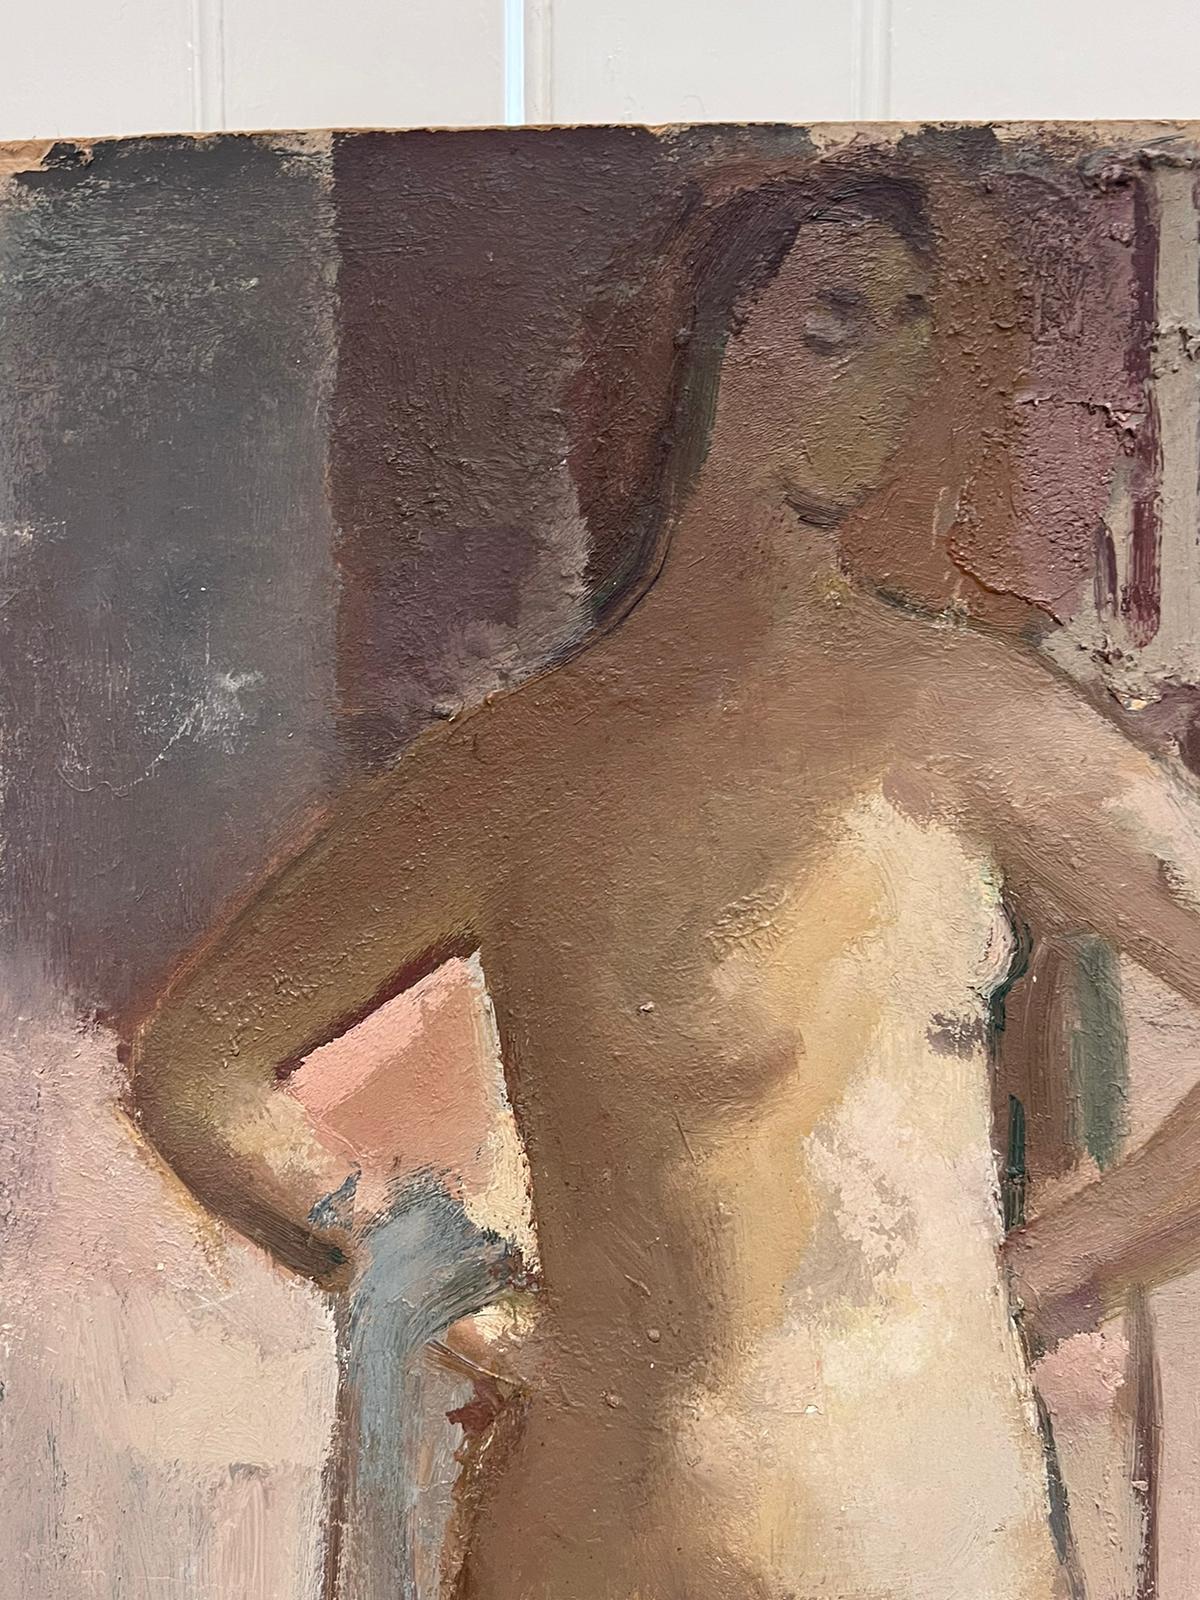 The Studio Nude
Modern British artist, 1960's
label verso
oil on board, unframed
board: 21.5 x 12 inches
provenance: private collection, UK
condition: good and sound condition